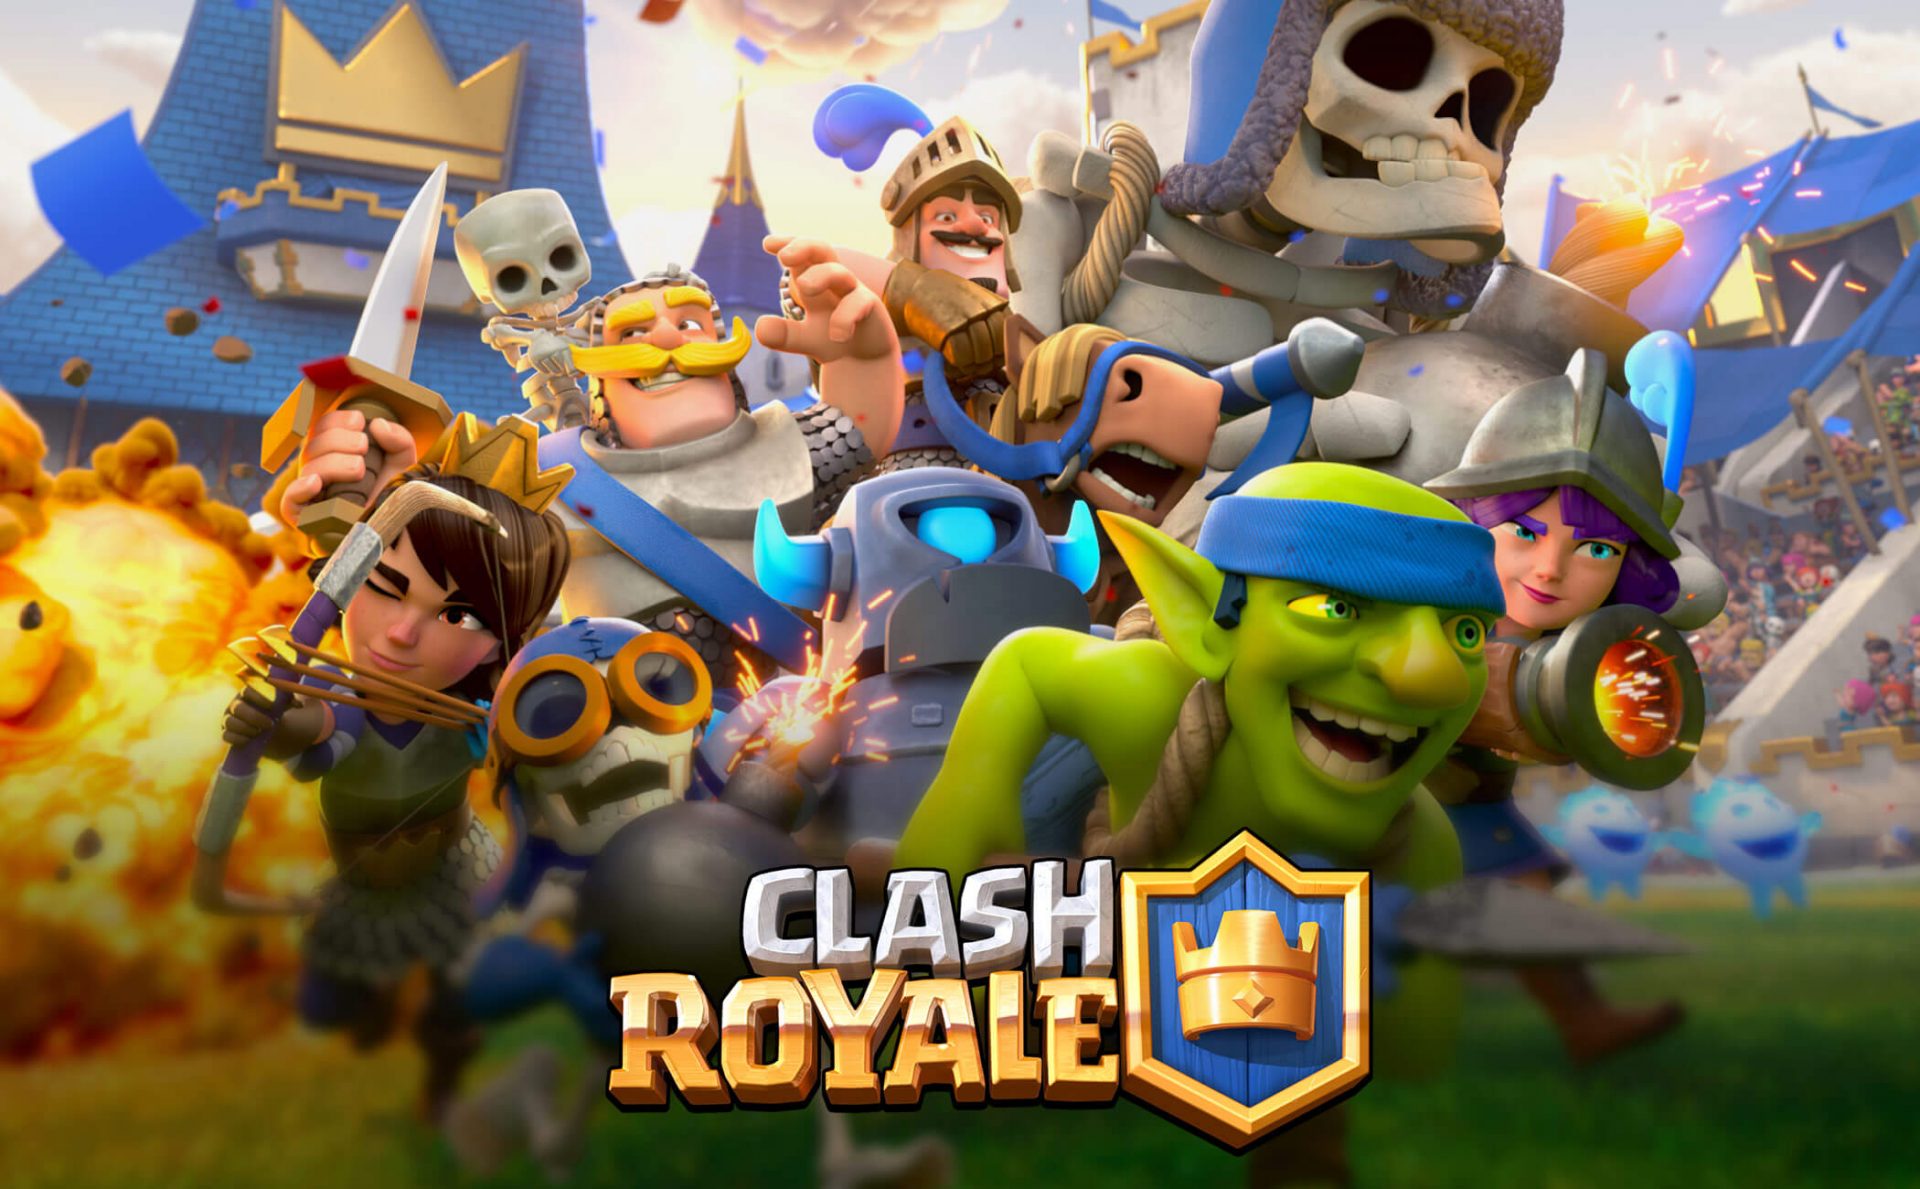 How to get free gold in Clash Royale